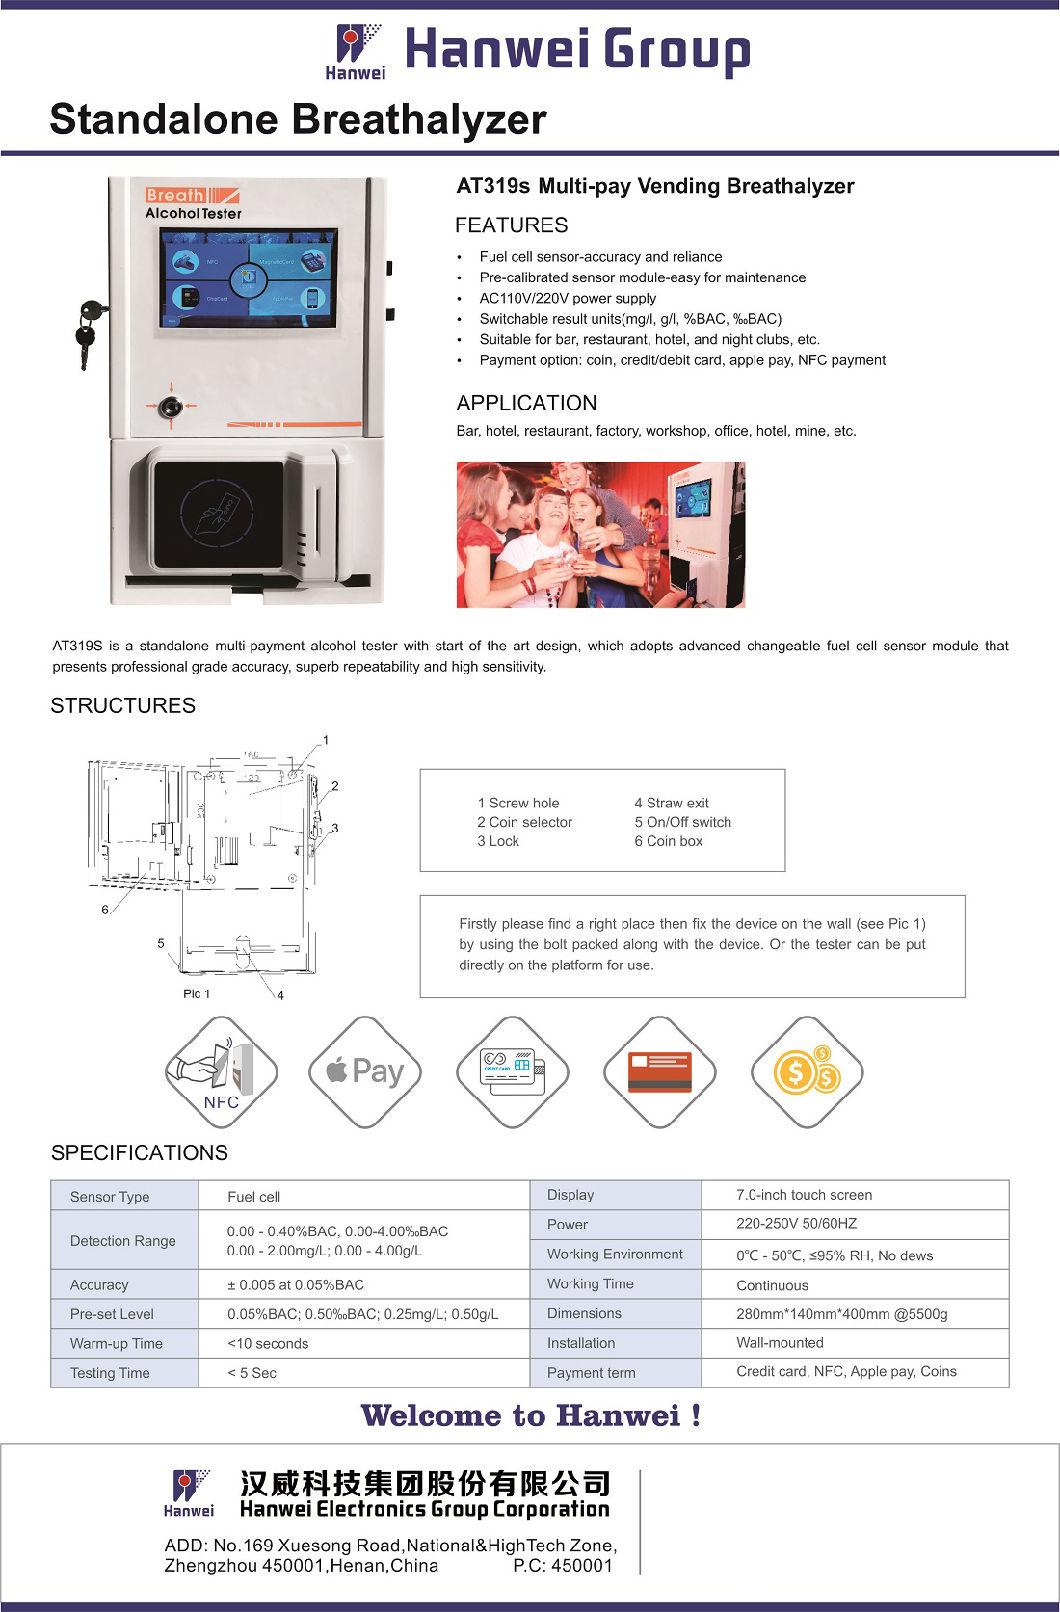 At319s Standalone Alcohol Tester Switchable Result Units (mg/l, g/l, %BAC, ‰ BAC)